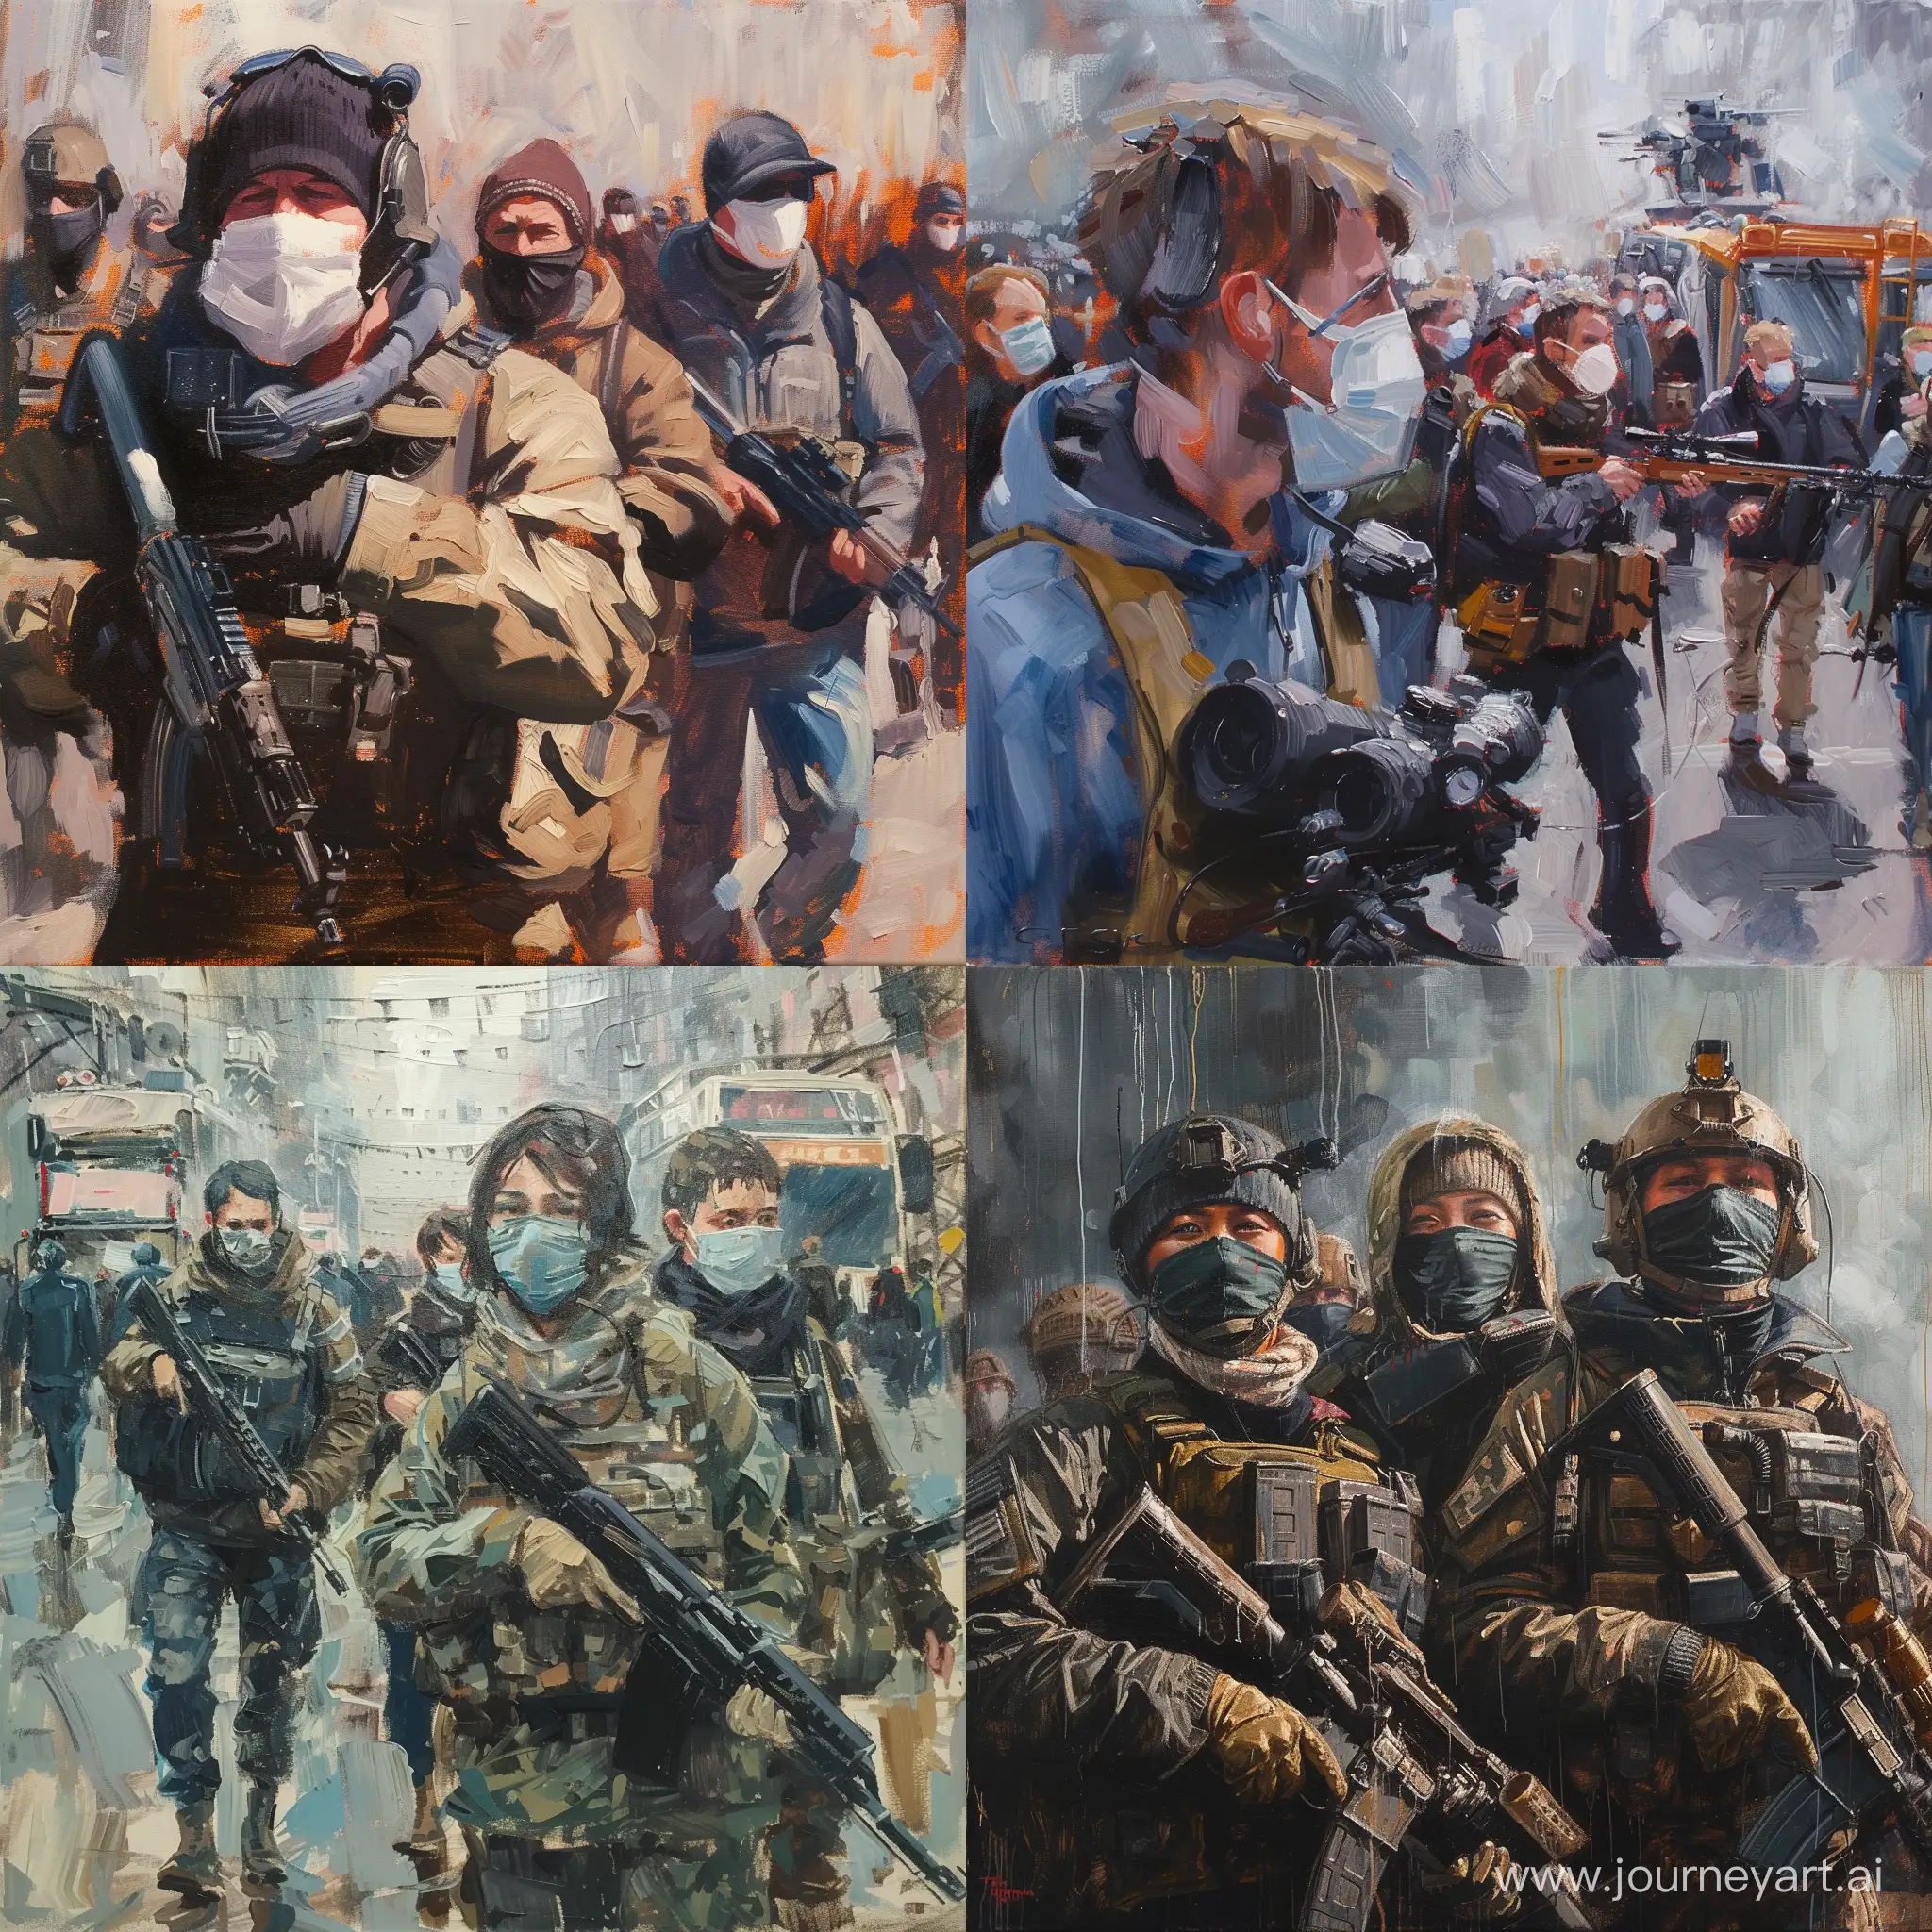 Modern-Military-Equipment-and-People-in-Masks-Terrorist-Attack-Depicted-in-Oil-Painting